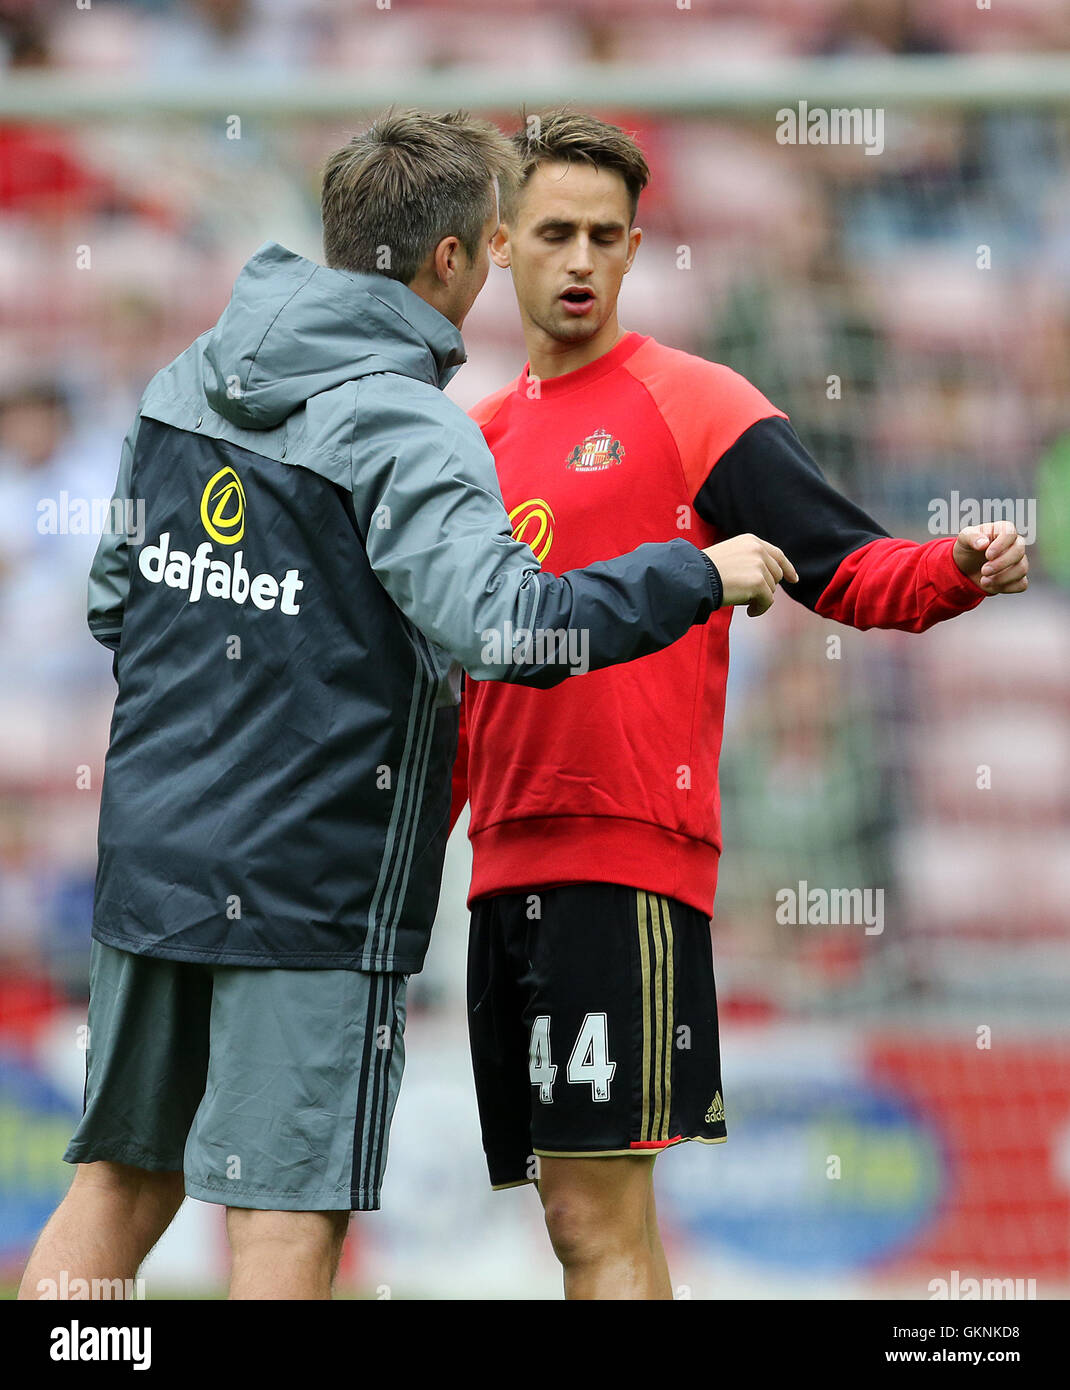 Sunderland's Adnan Januzaj ahead of the Premier League match at the Stadium of Light, Sunderland. PRESS ASSOCIATION Photo. Picture date: Sunday August 21, 2016. See PA story SOCCER Sunderland. Photo credit should read: Richard Sellers/PA Wire. RESTRICTIONS: EDITORIAL USE ONLY No use with unauthorised audio, video, data, fixture lists, club/league logos or 'live' services. Online in-match use limited to 75 images, no video emulation. No use in betting, games or single club/league/player publications. Stock Photo